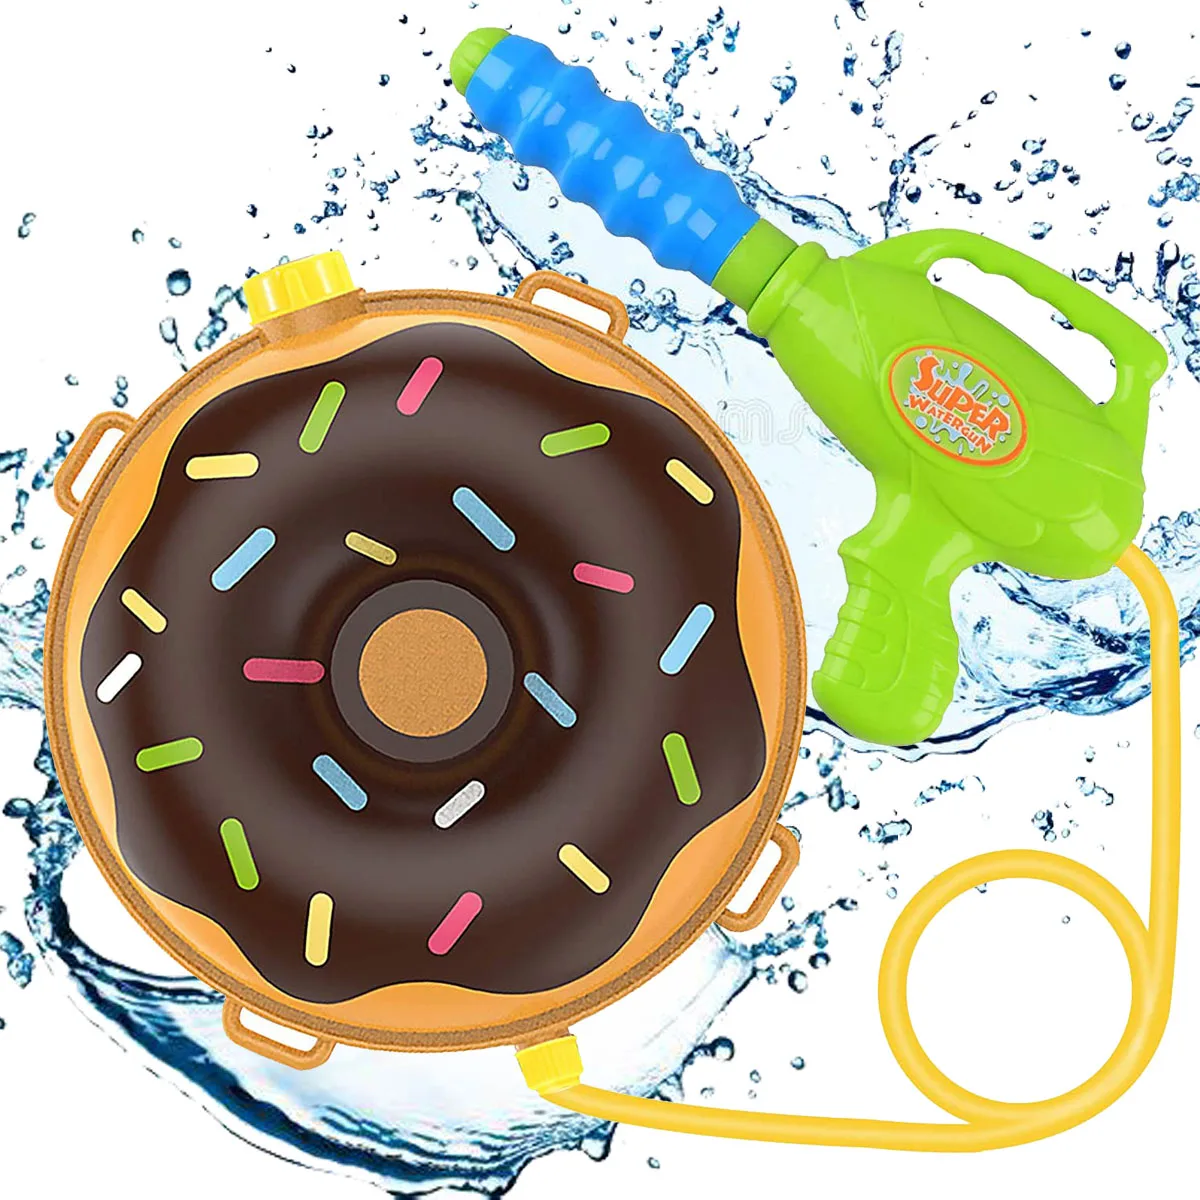 

Backpack Water Gun Water Blaster Water Shooter for Kids with Tank Bug Toys Outdoor Toys for Pool Beach Water Toy Chocolate Donut